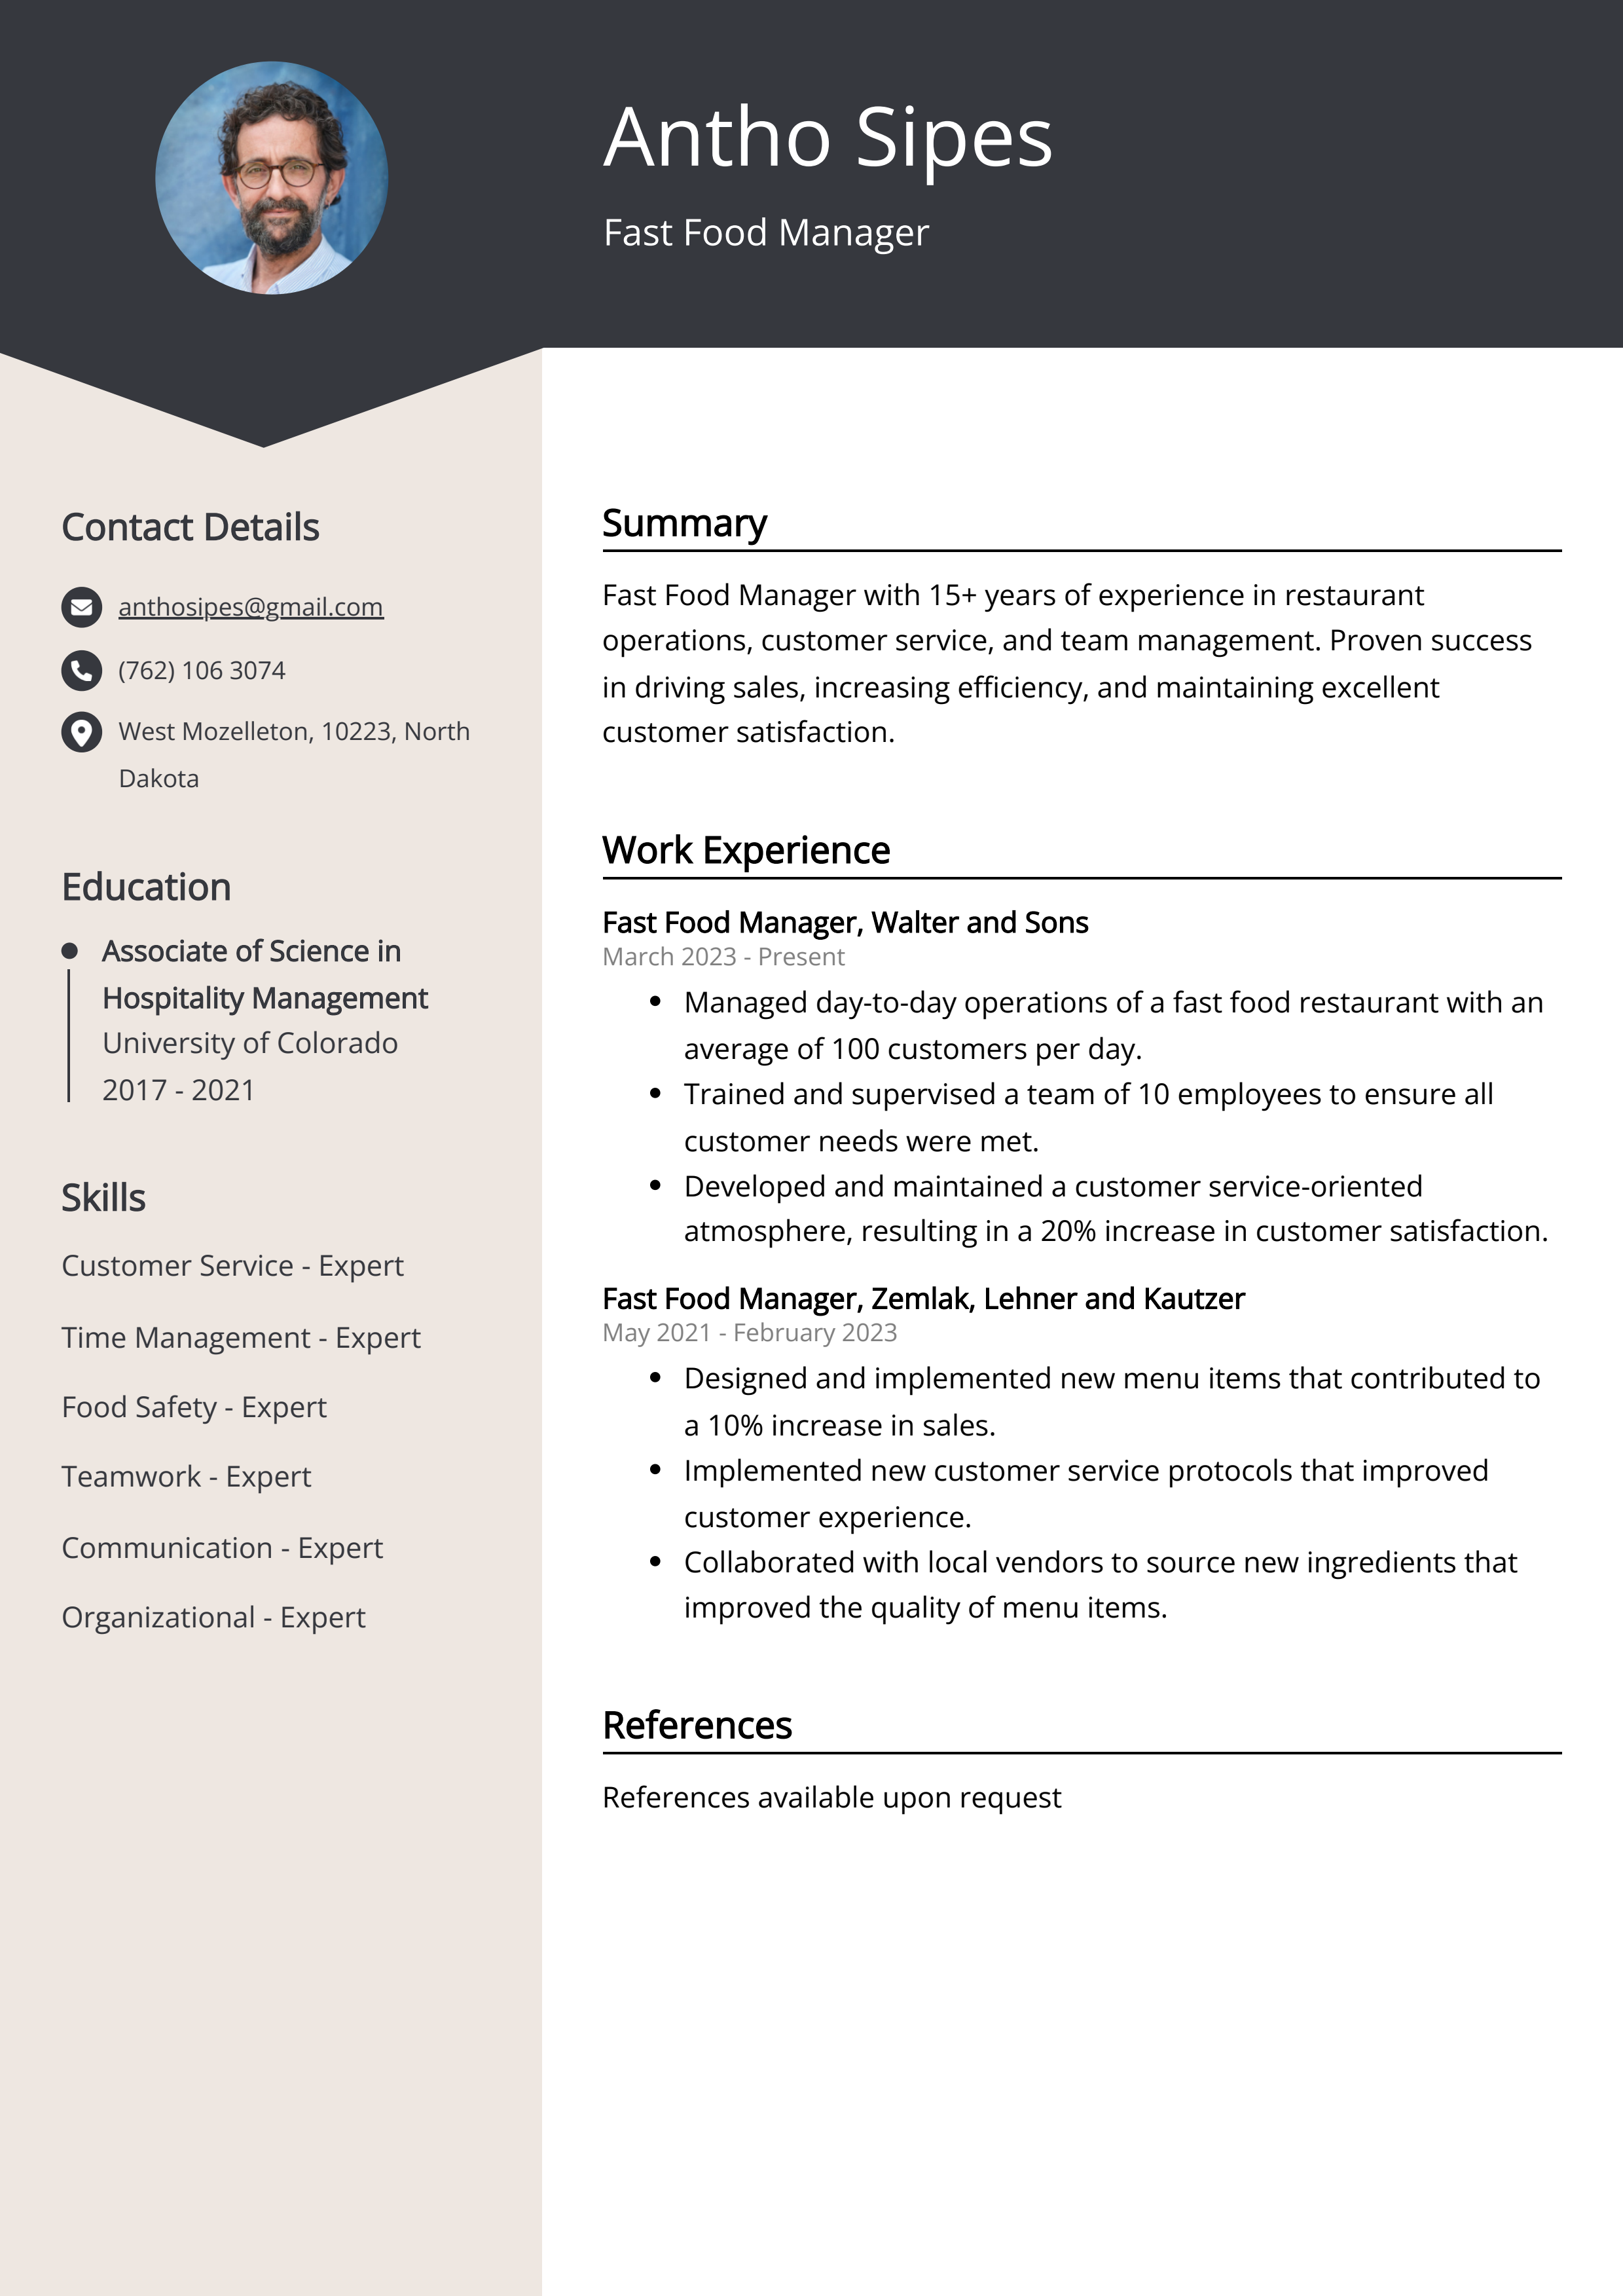 Fast Food Manager CV Example